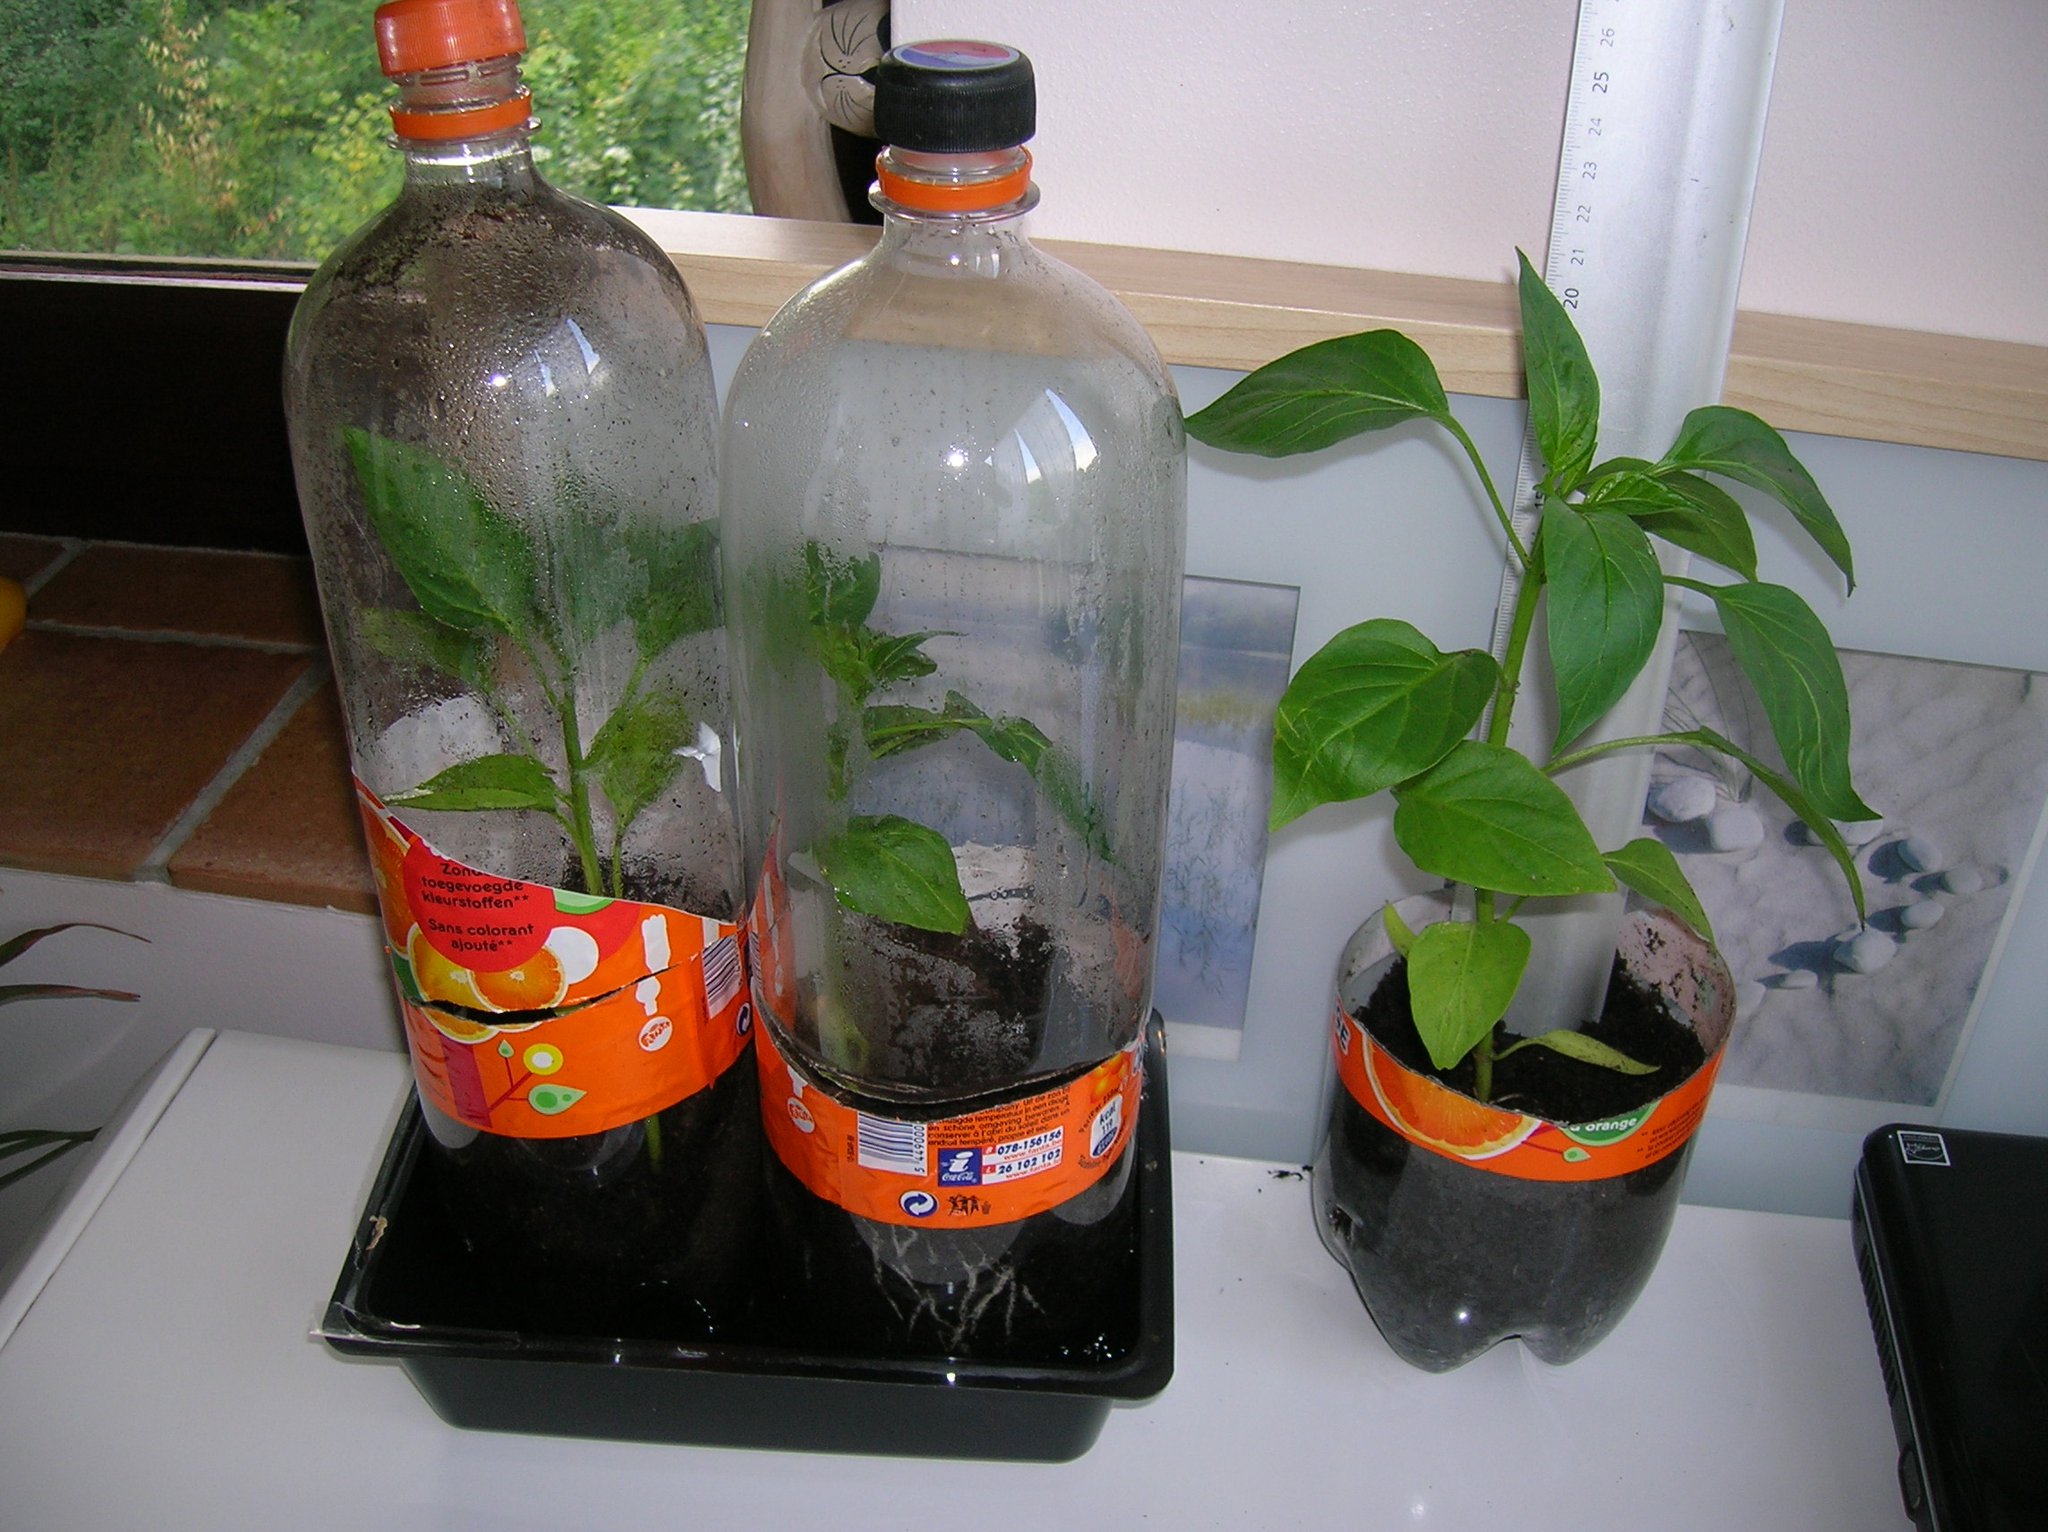 How To Re-purpose A Food Container As A Mini Greenhouse Kids